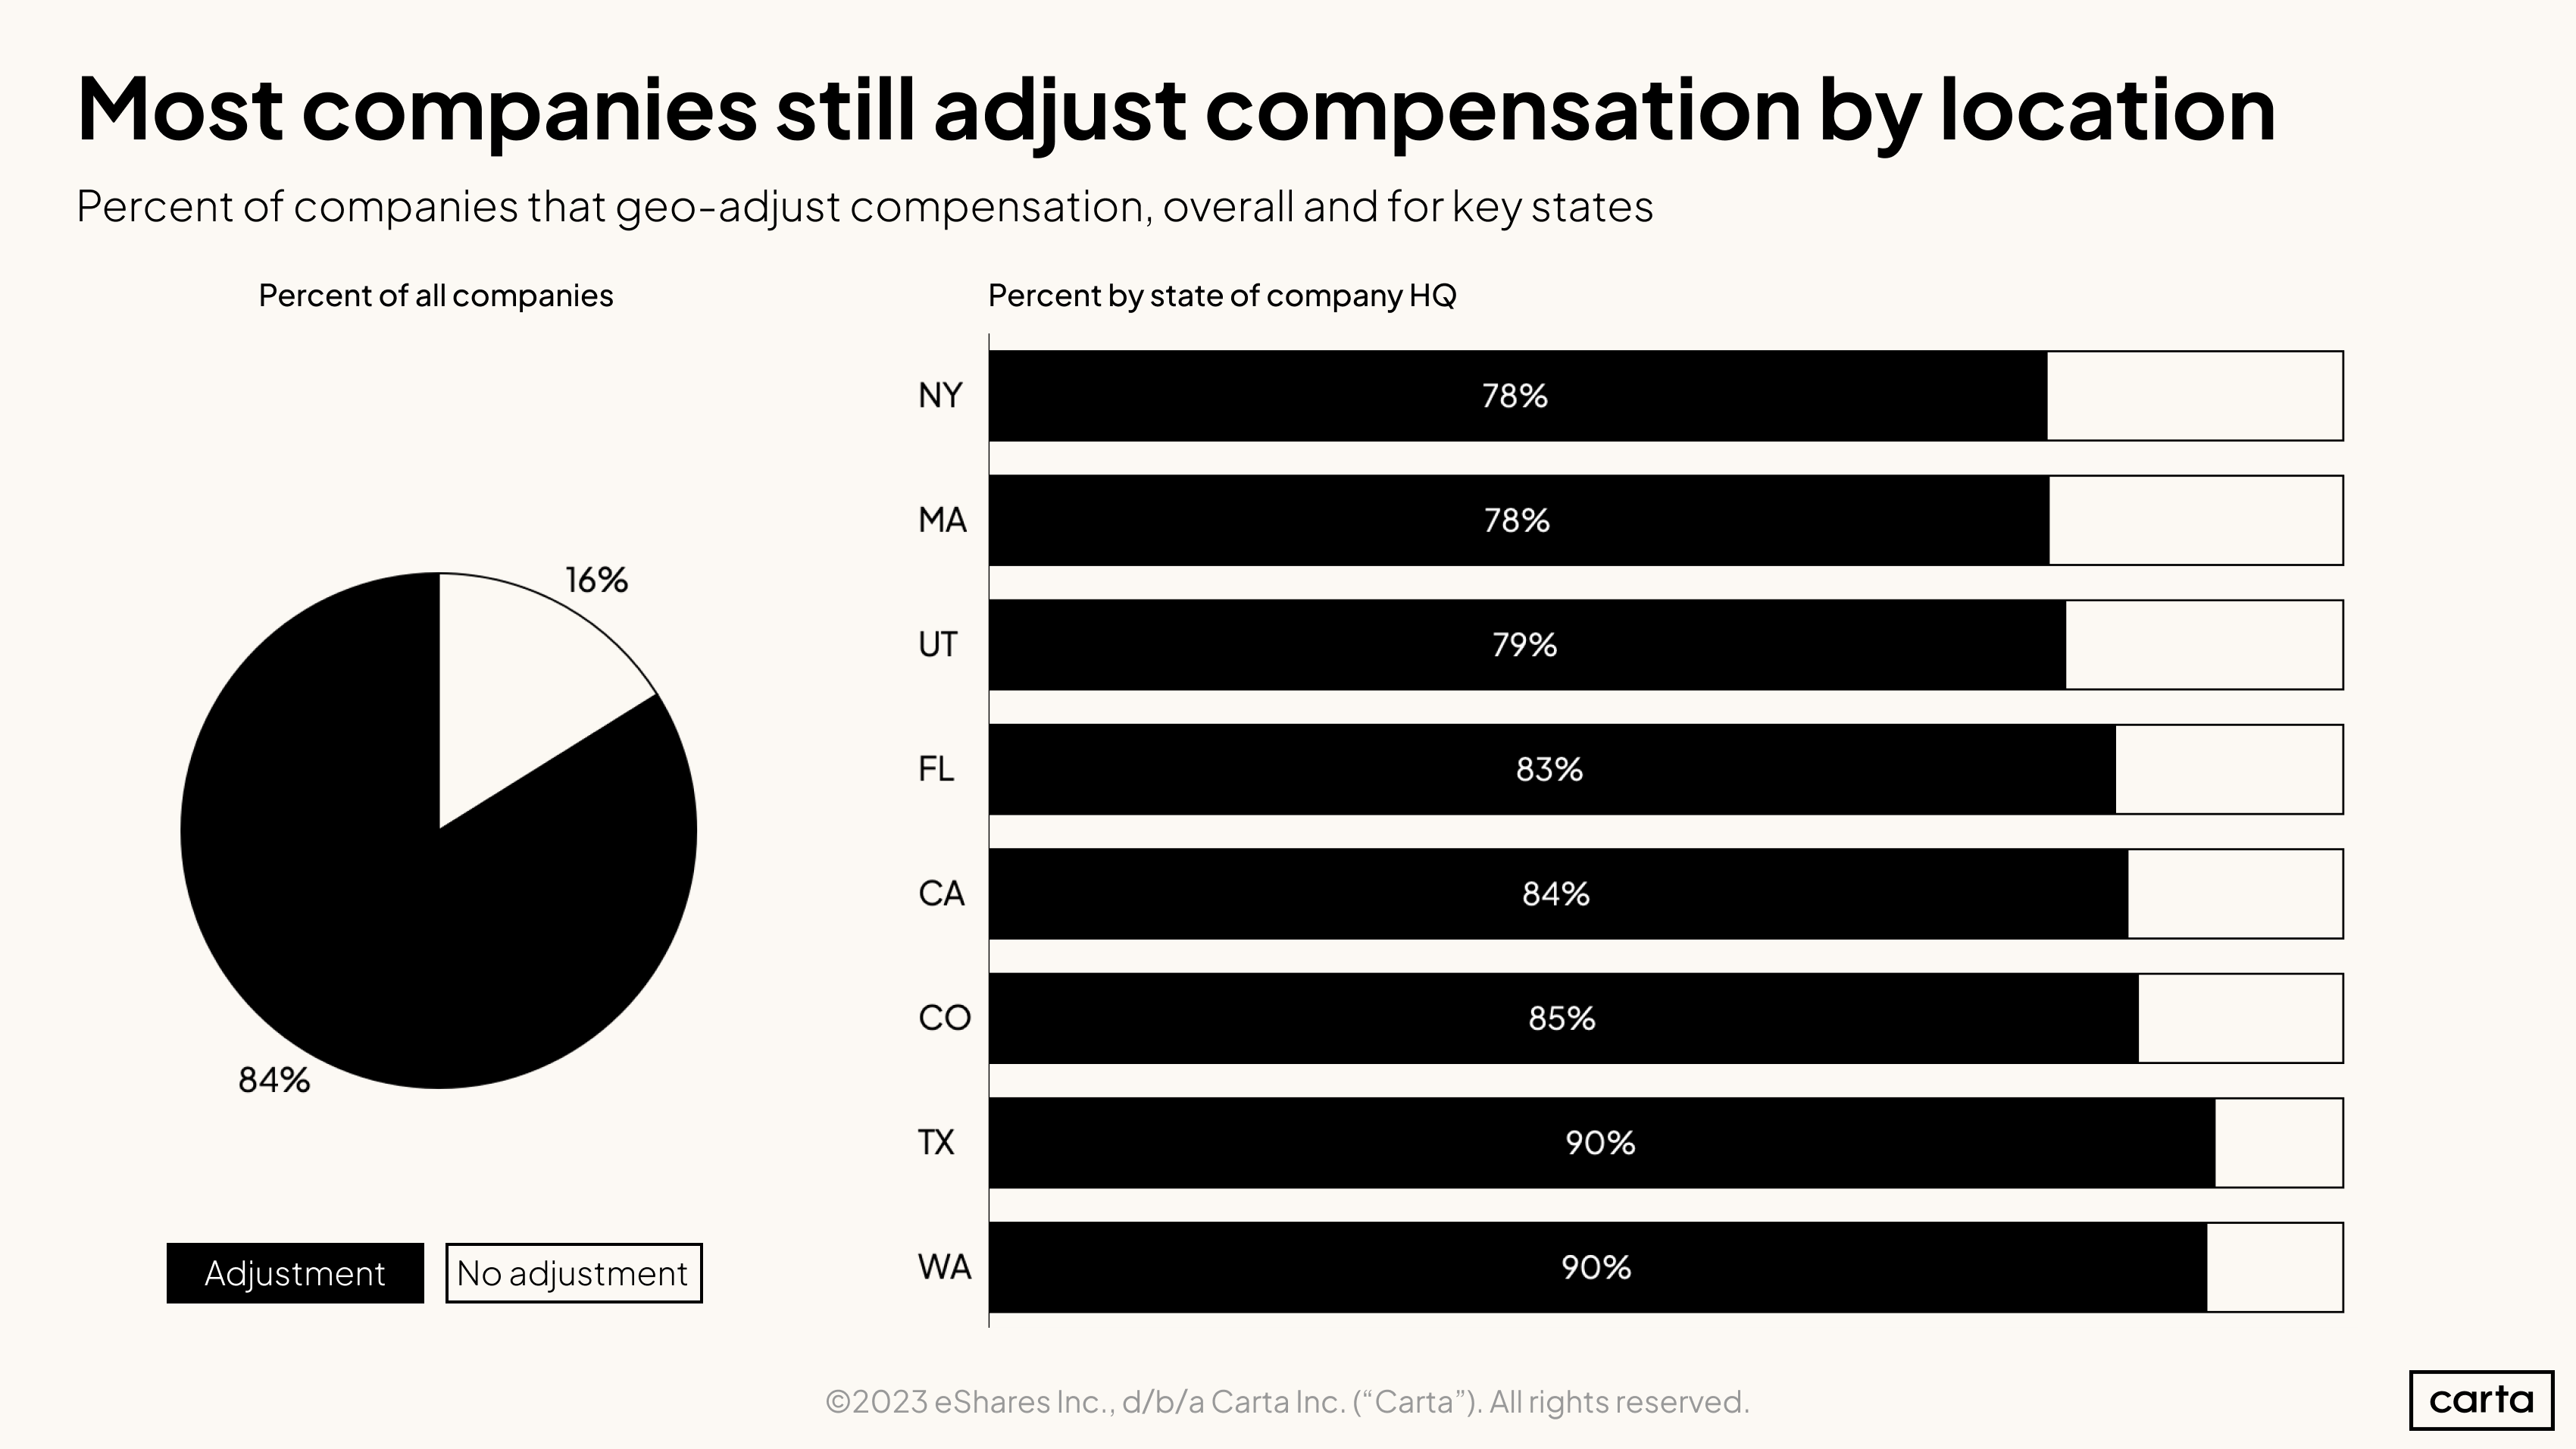 Percent of companies that geo-adjust compensation, overall and for key states